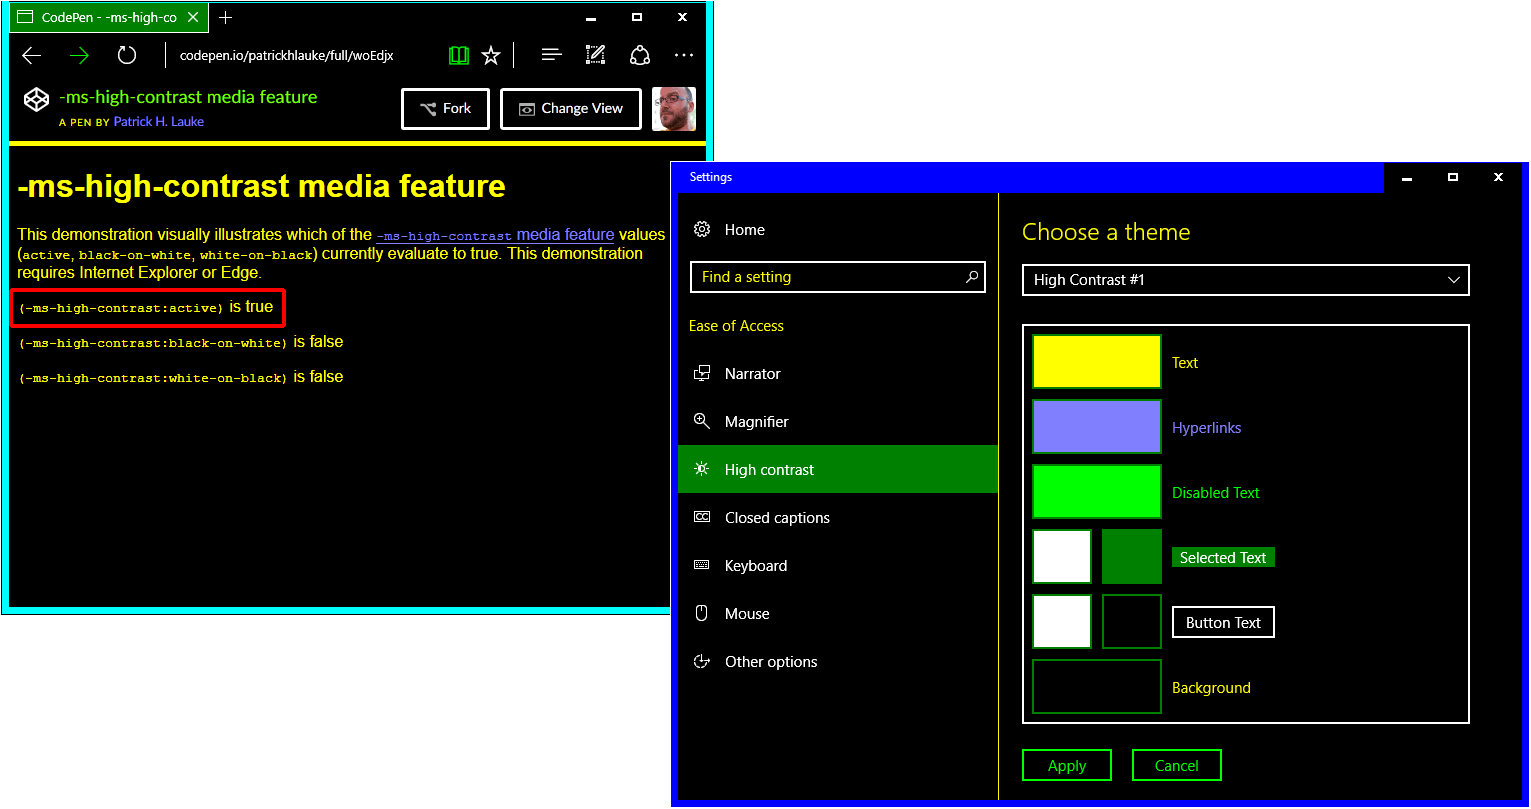 Screenshot of media feature test in Edge in High Contrast #1 mode